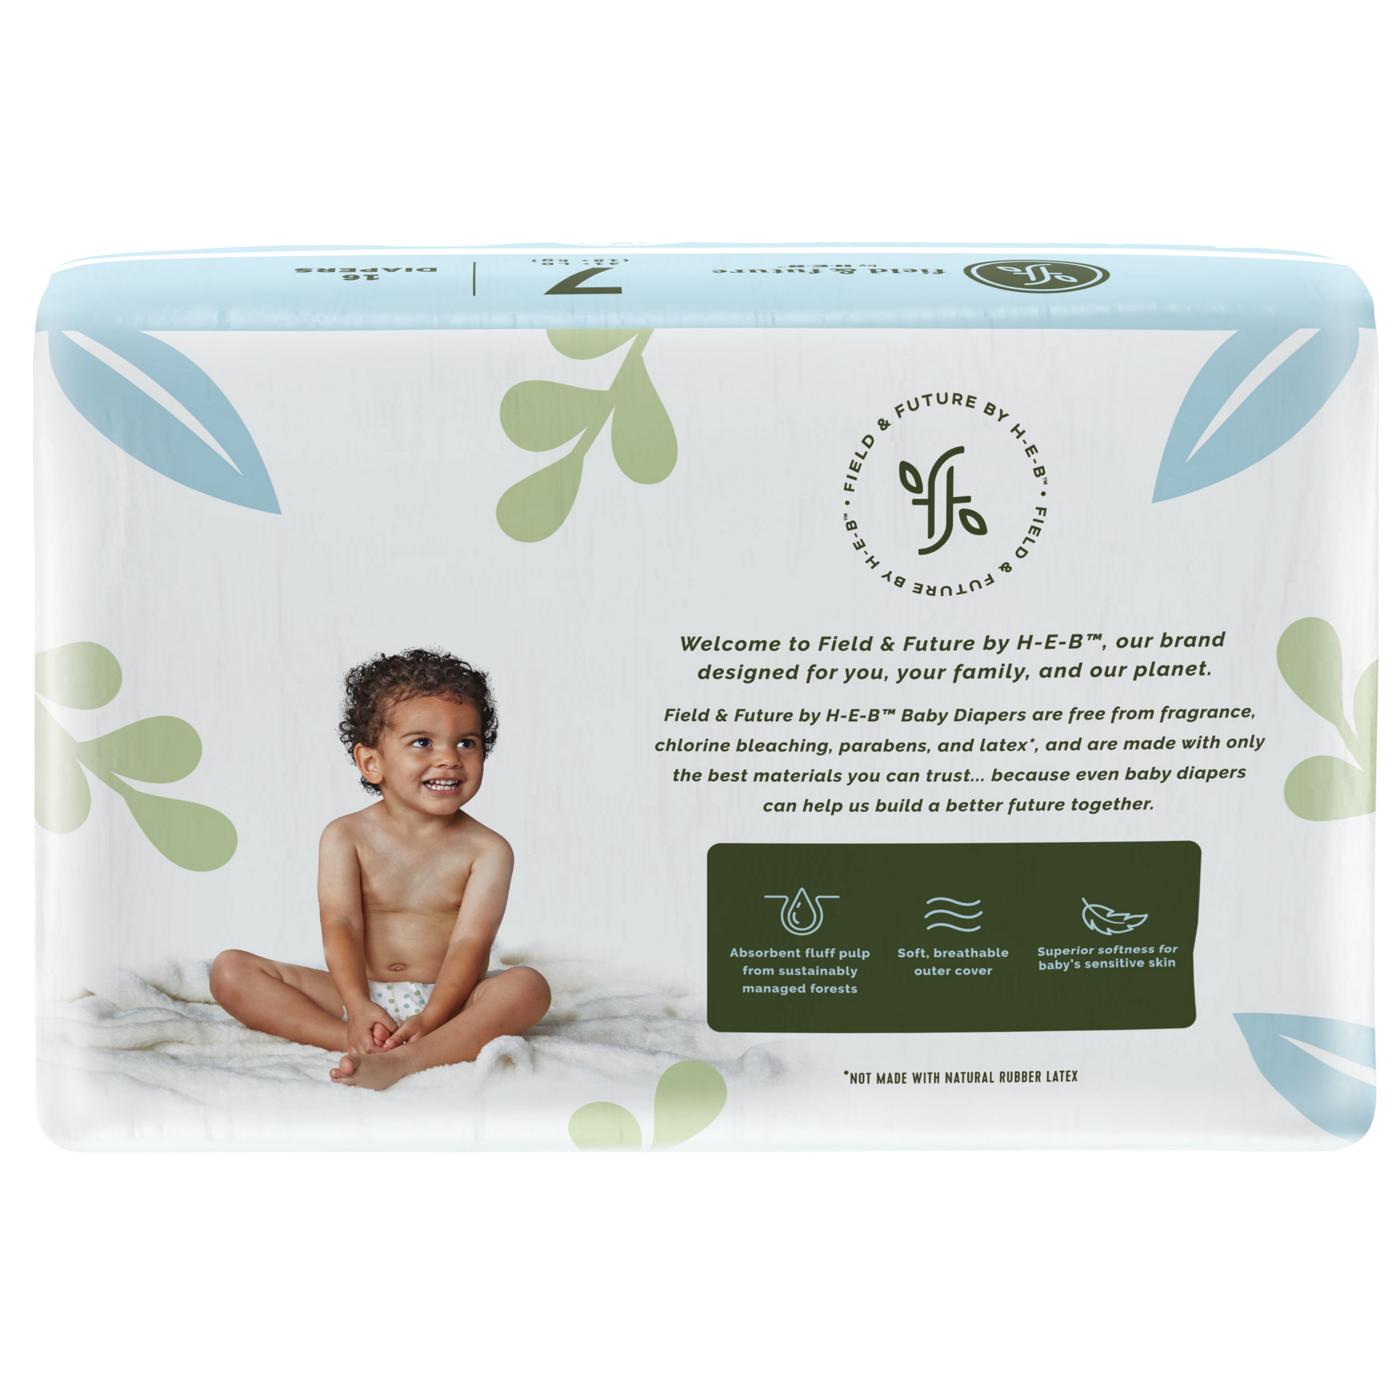 Field & Future by H-E-B Jumbo Pack Baby Diapers - Size 7; image 5 of 6